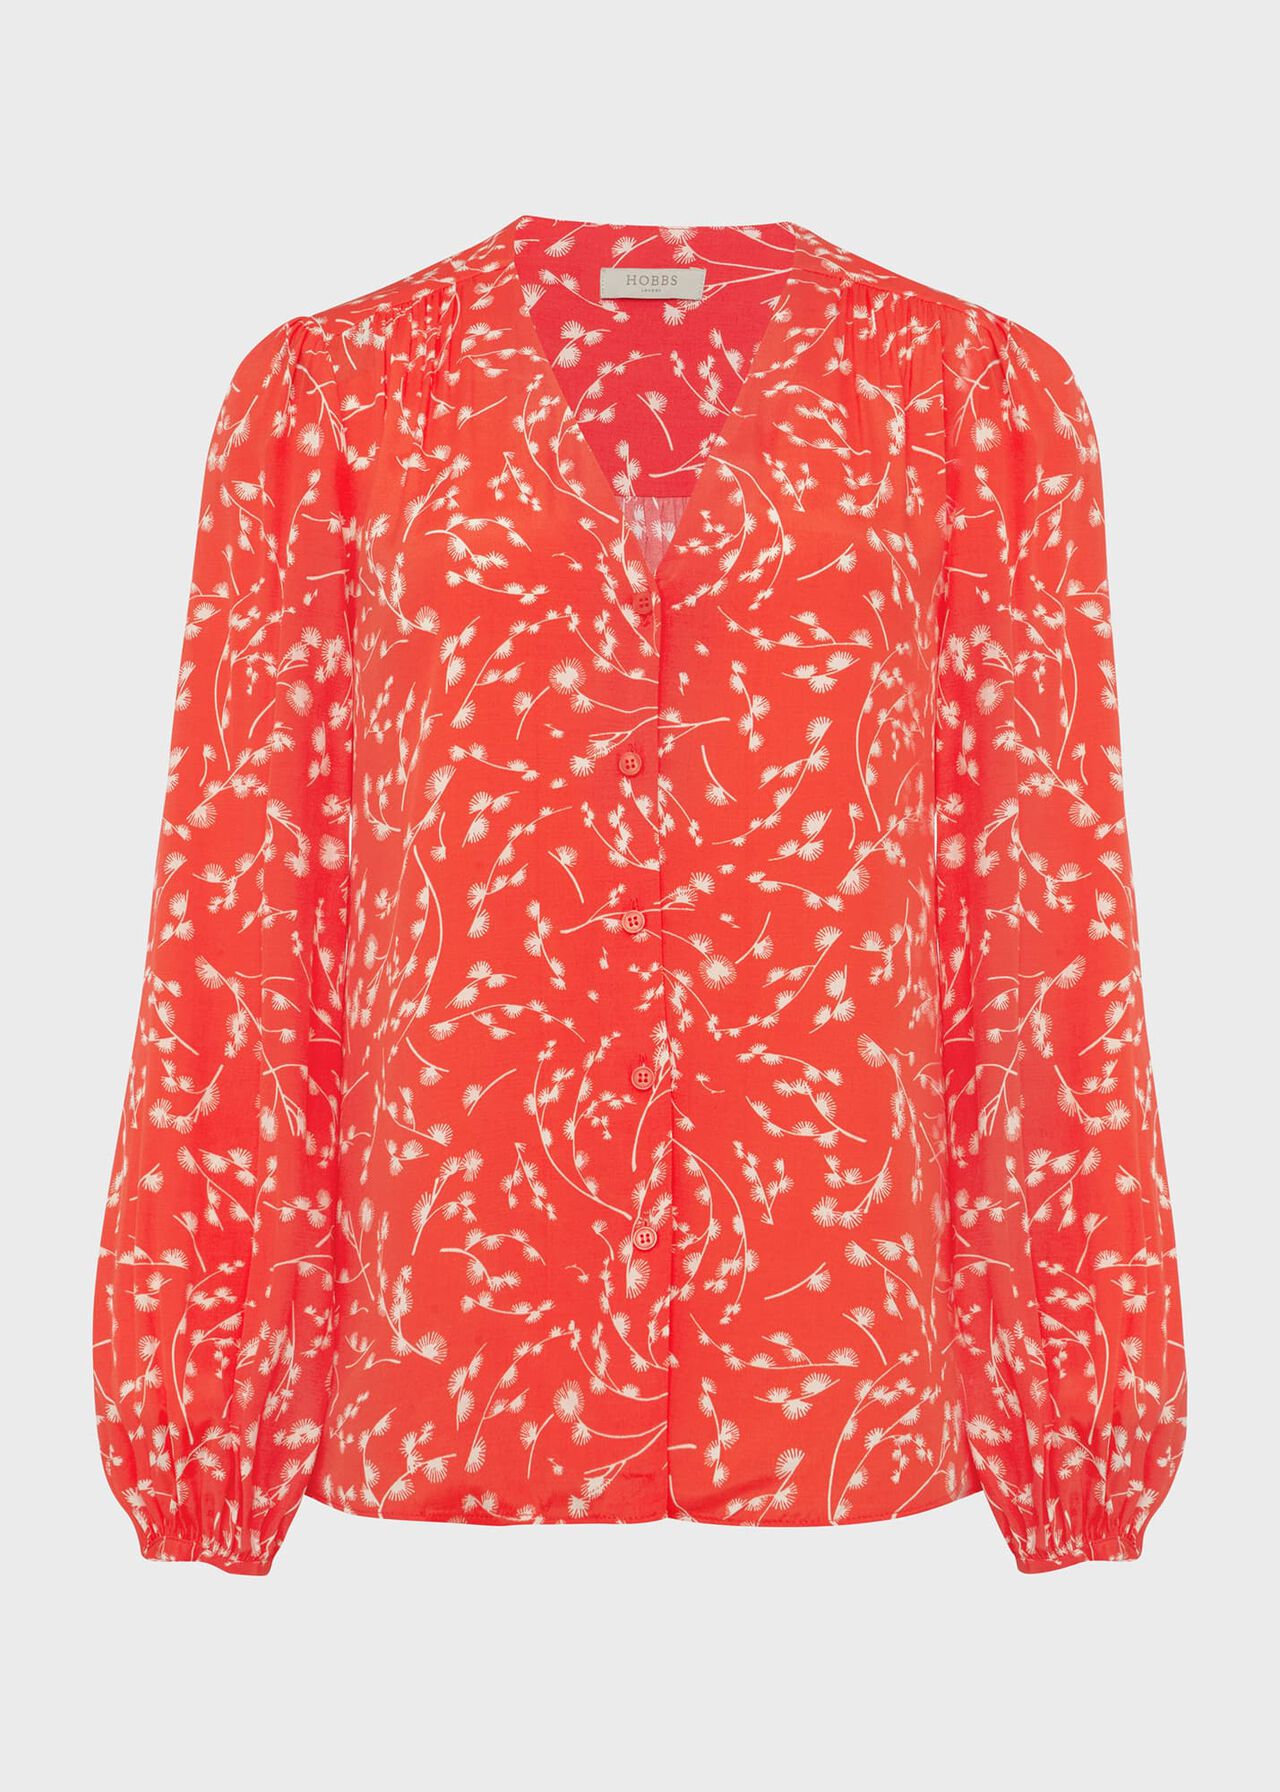 Felicity Blouse, Coral Red Ivory, hi-res